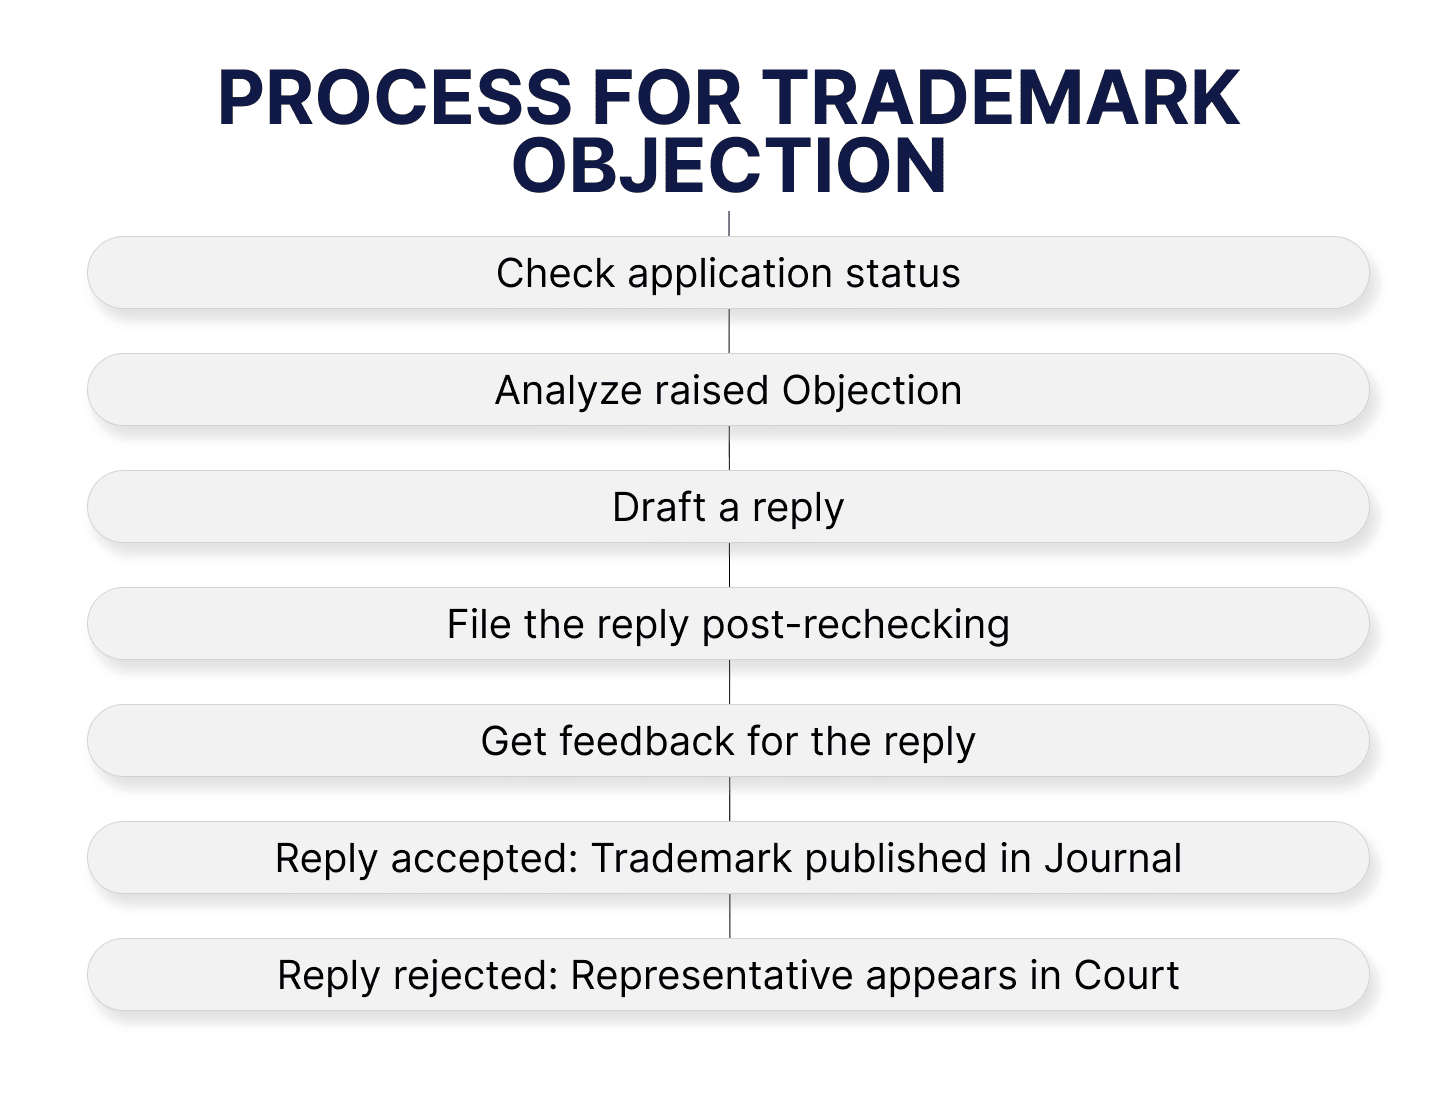 Process for Trademark Objection